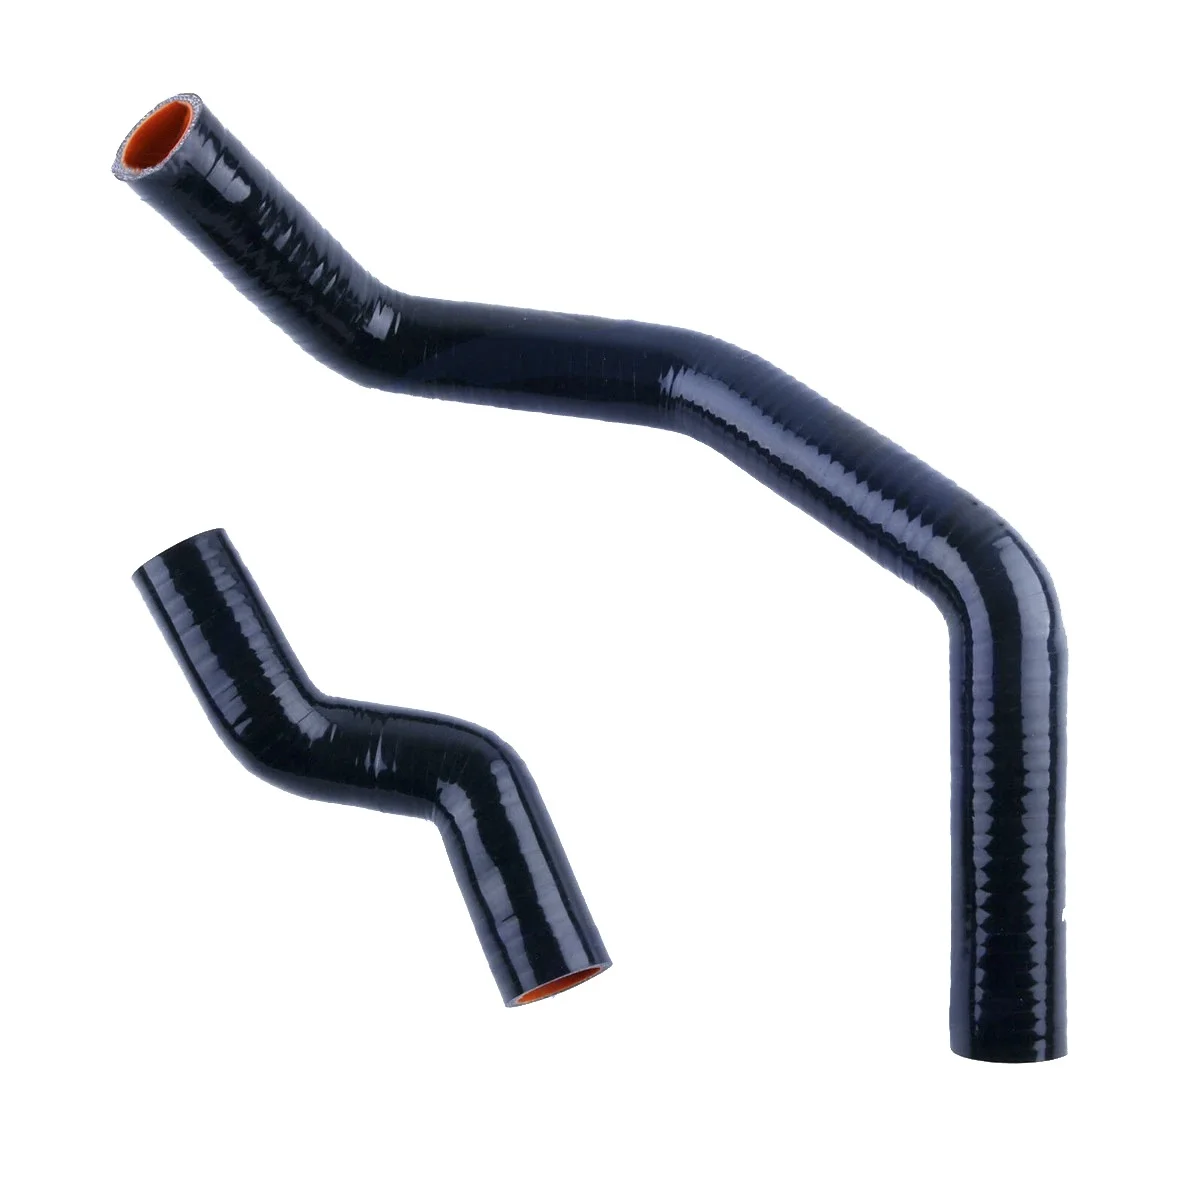 

New Silicone Radiator Coolant Cooling Hose Pipe Tube Tubing Duct Set Kit for Nissan Silvia 200SX 240SX S13 S14 S15 SR20DET Turbo